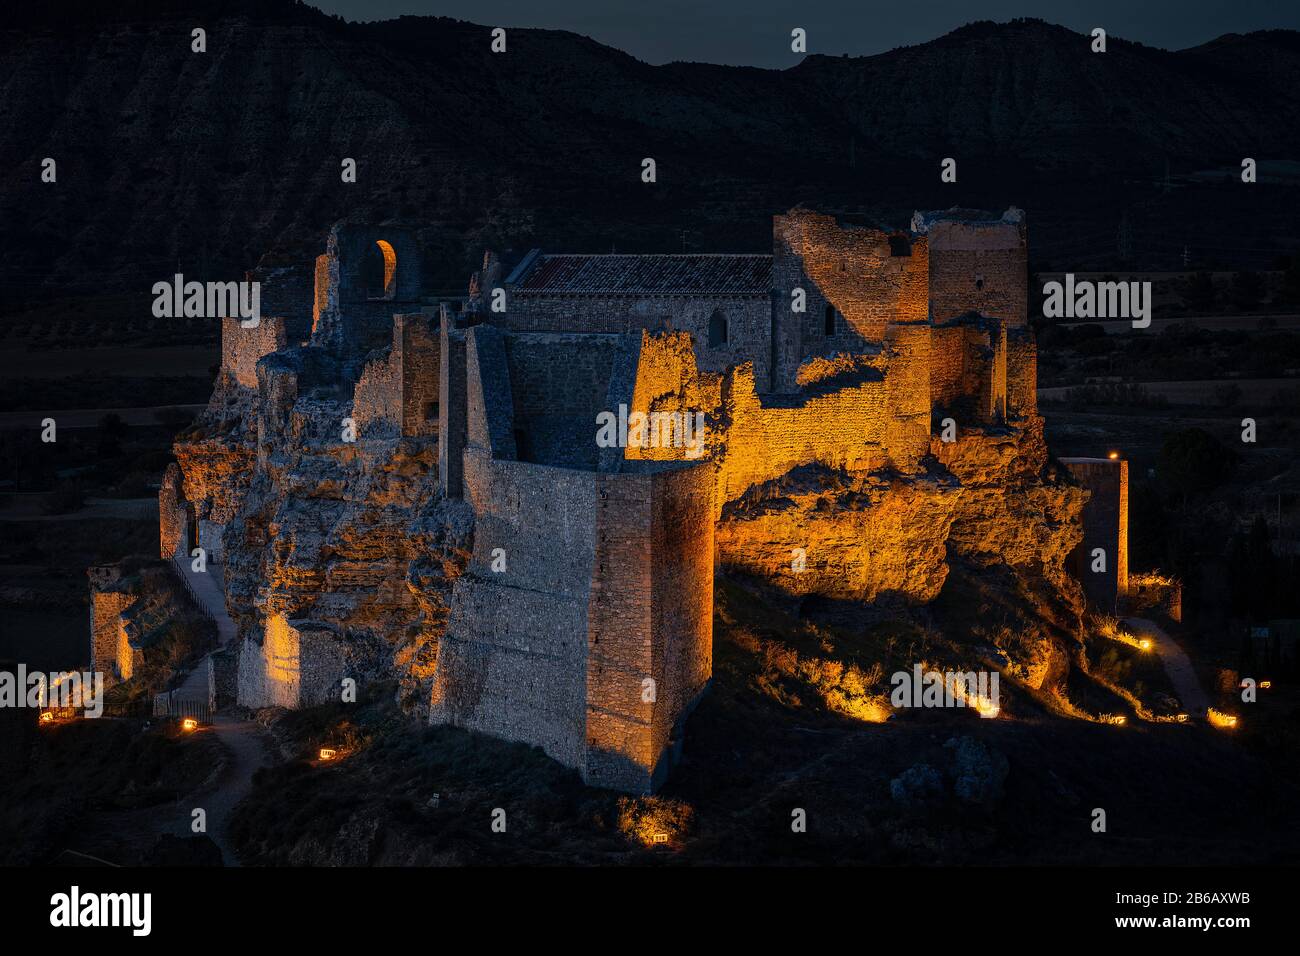 Castle at night Stock Photo